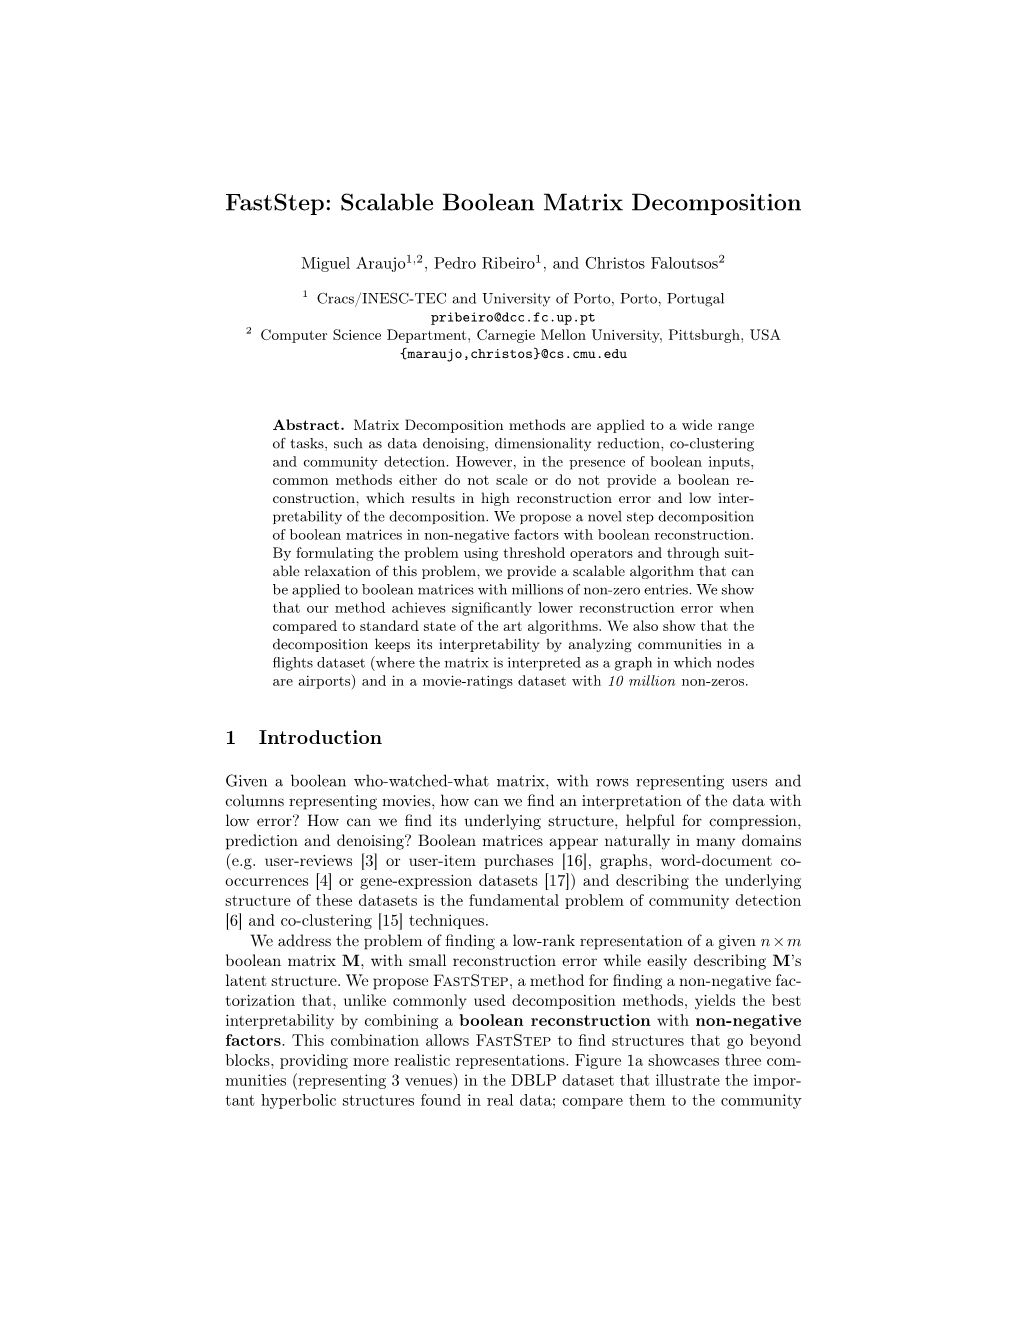 Faststep: Scalable Boolean Matrix Decomposition